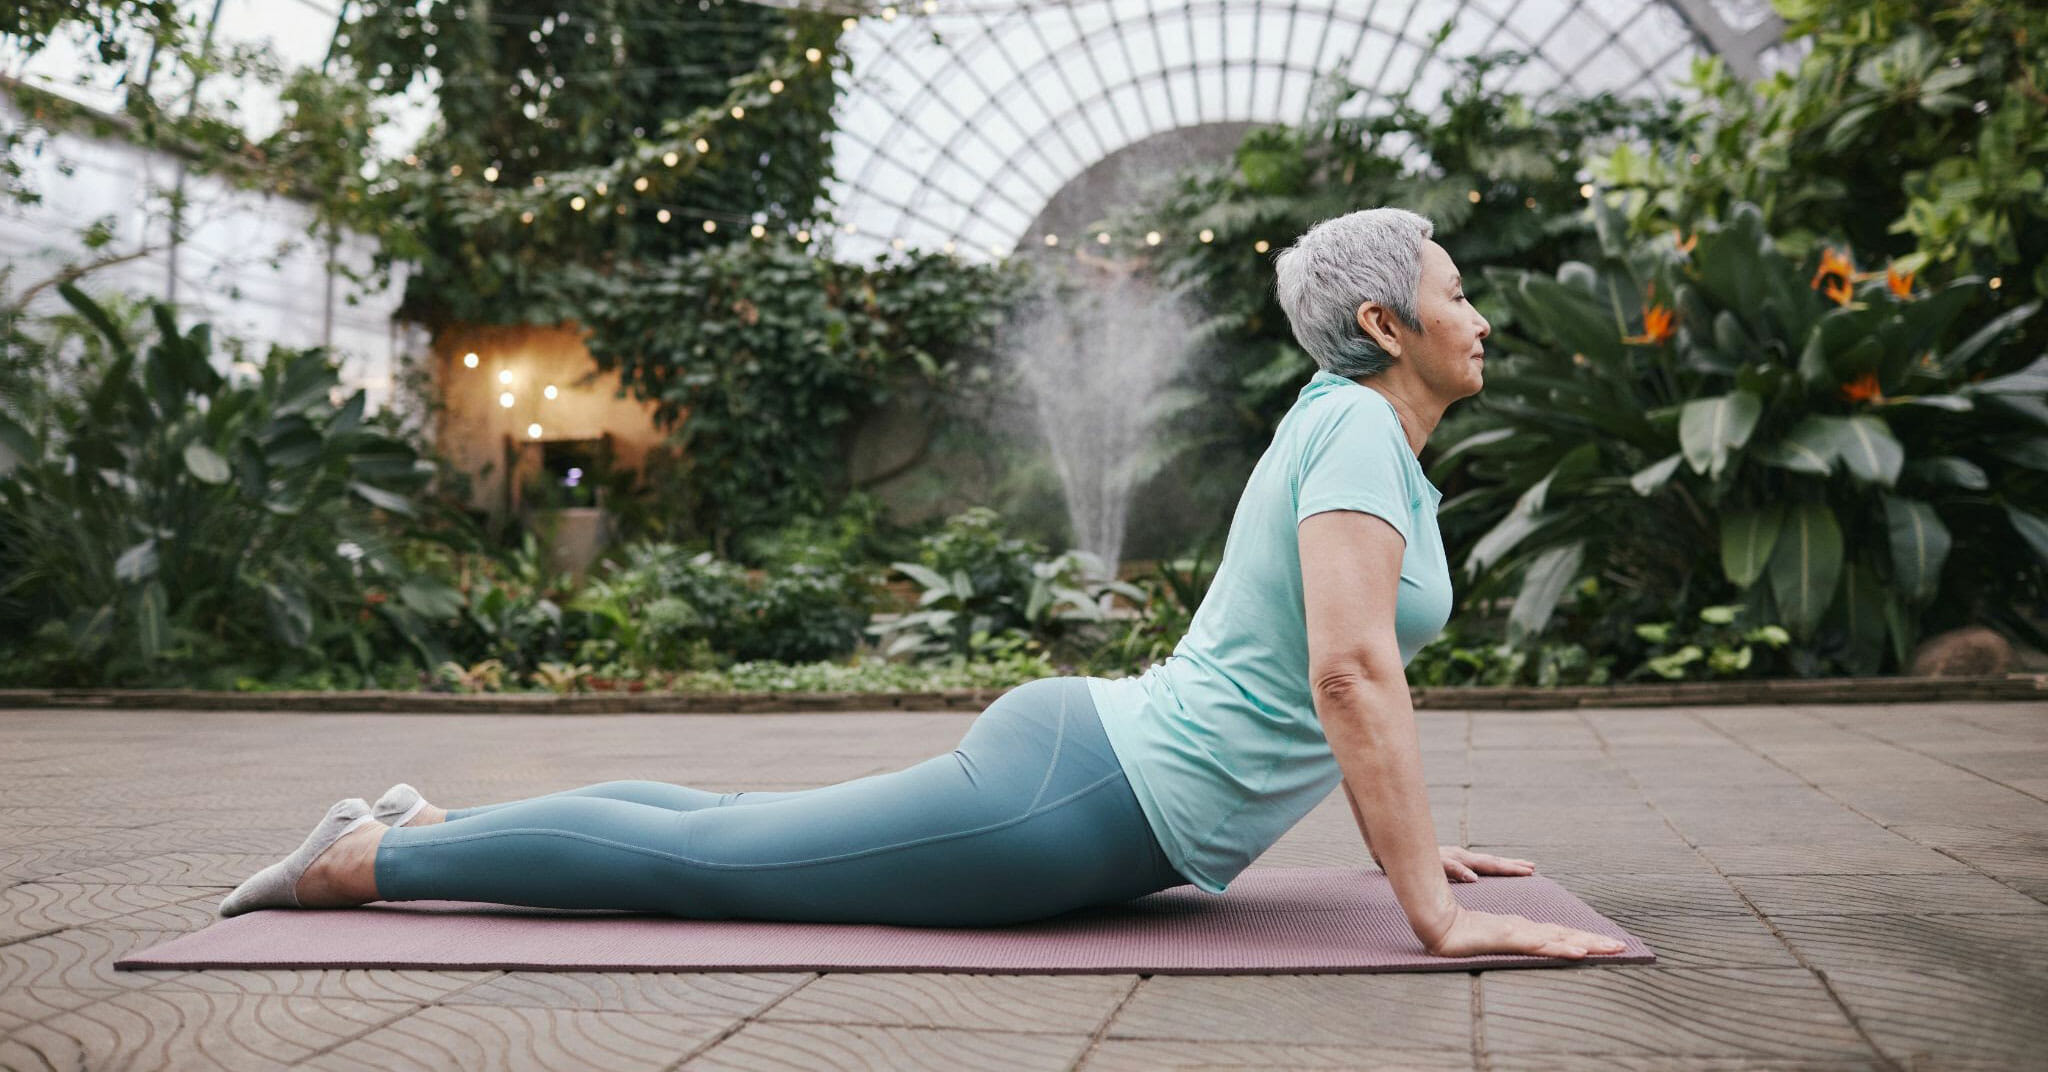 Older woman doing stretches outdoors